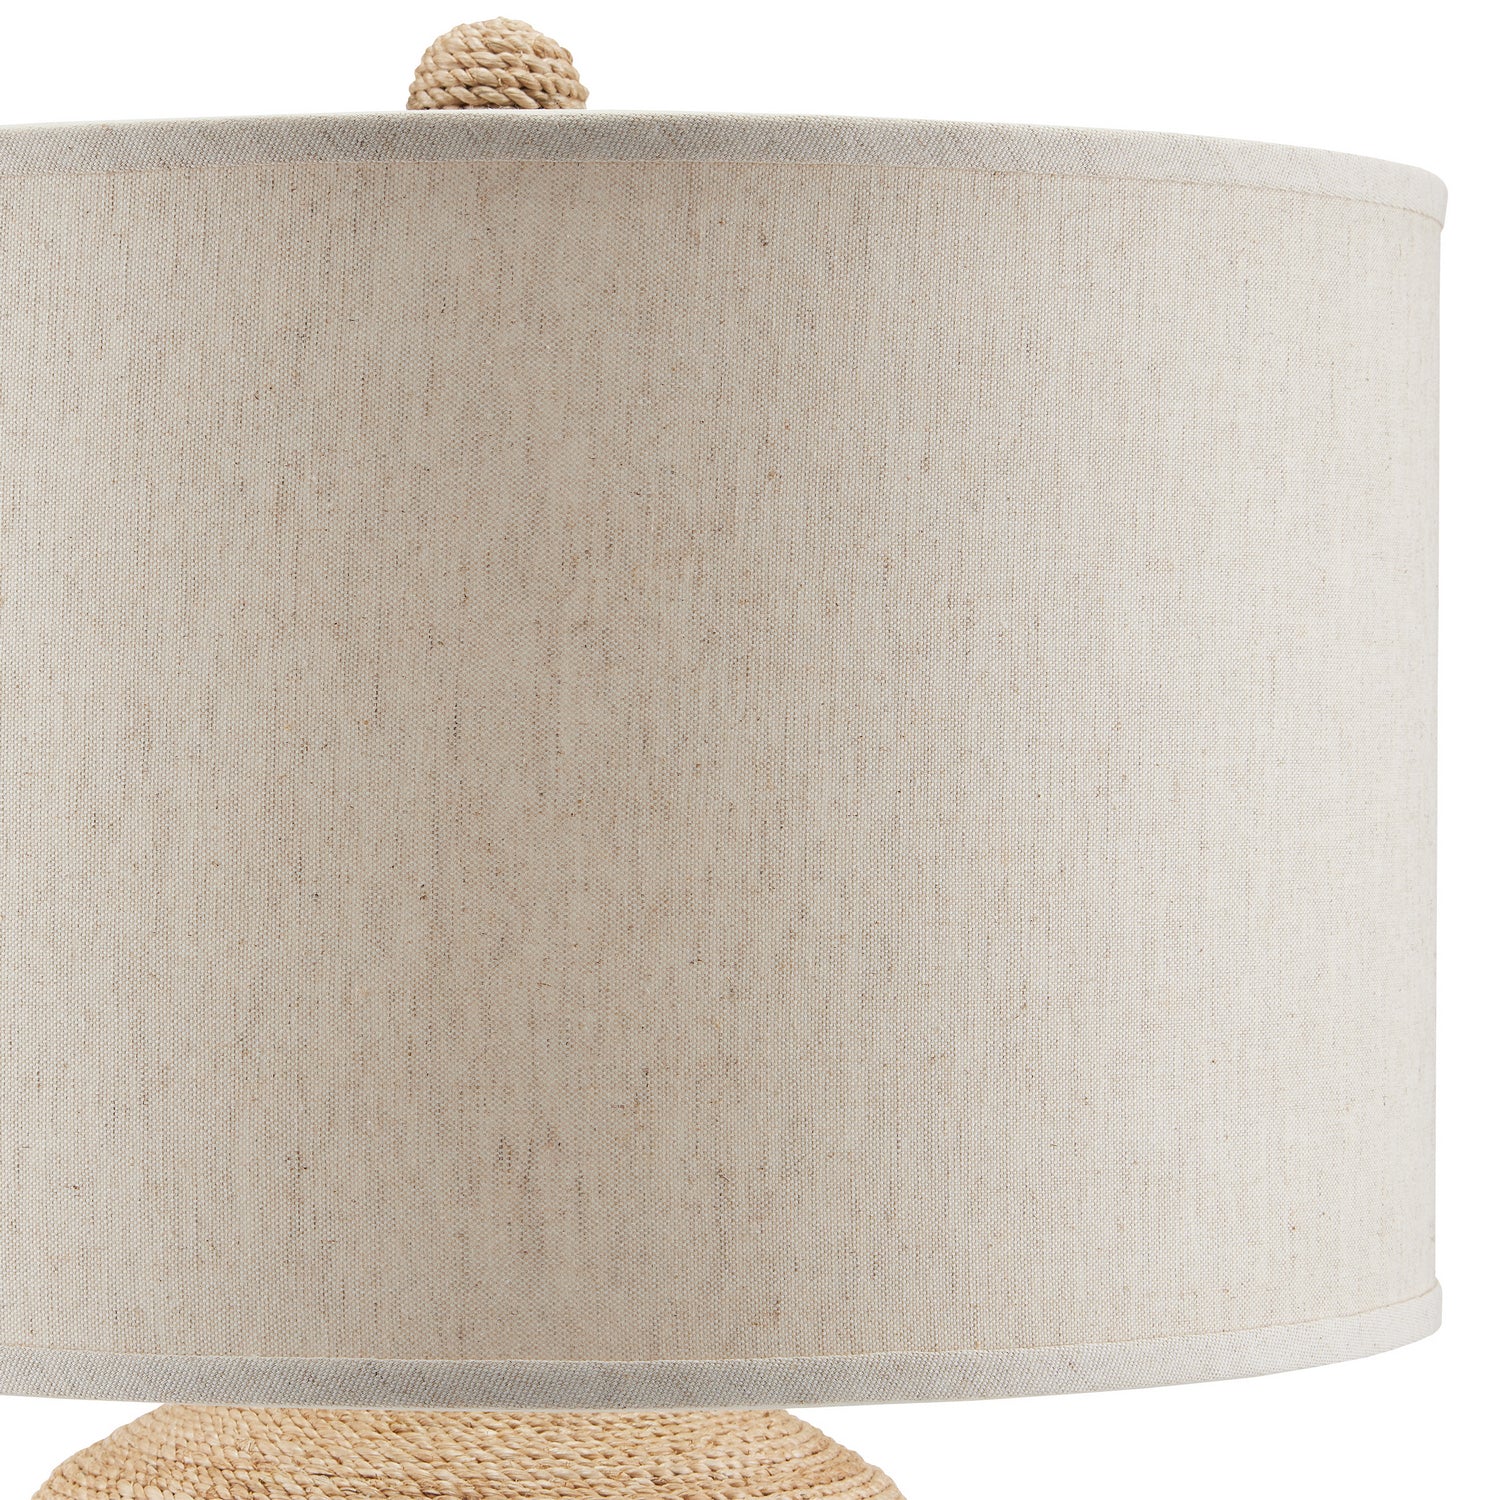 One Light Table Lamp from the Kavala collection in Natural Abaca Rope/Satin Black finish